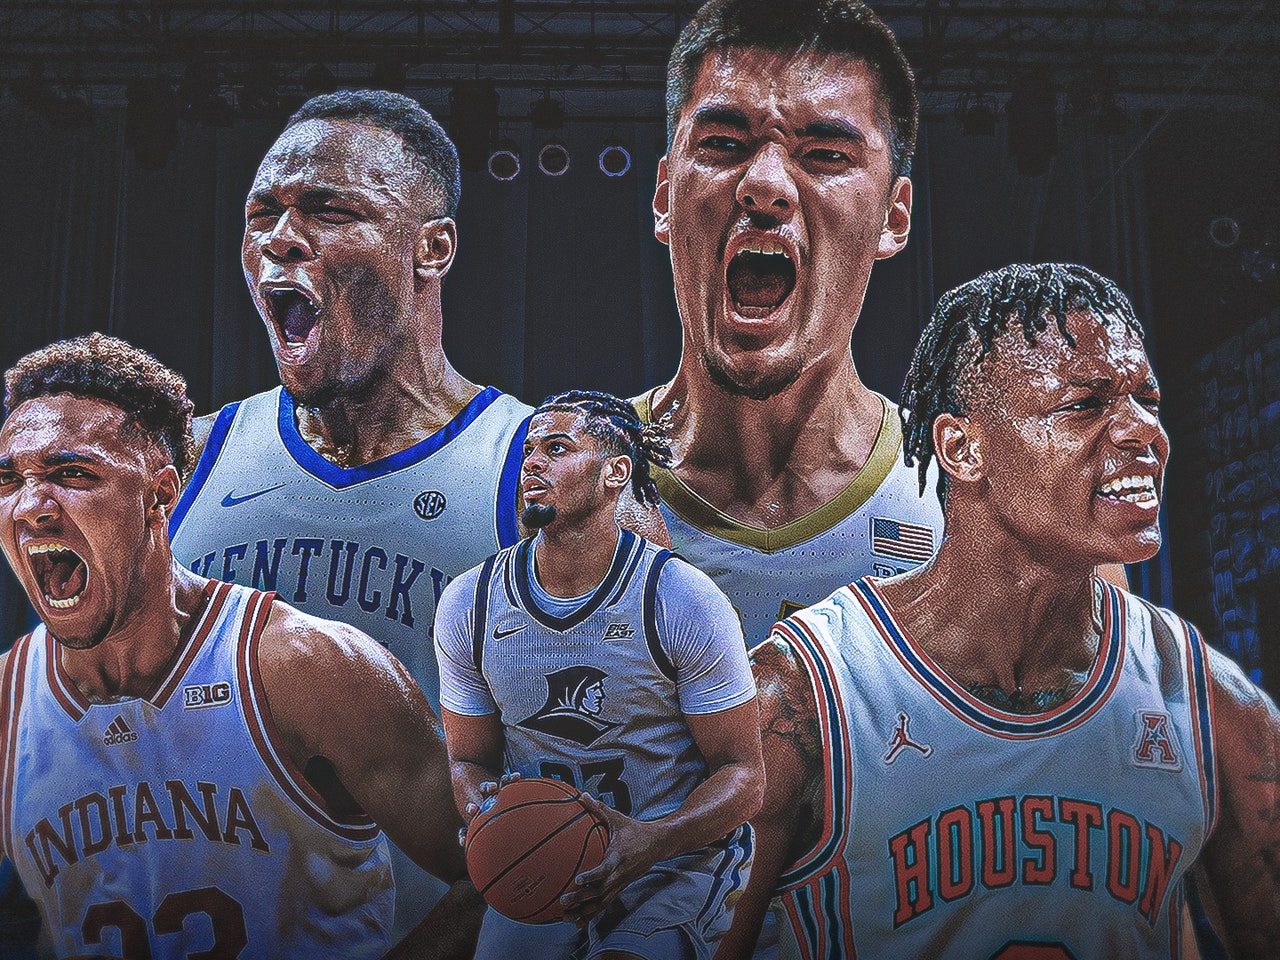 2019-2020 NBA Season Preview: The 10 Big Questions for the Orlando